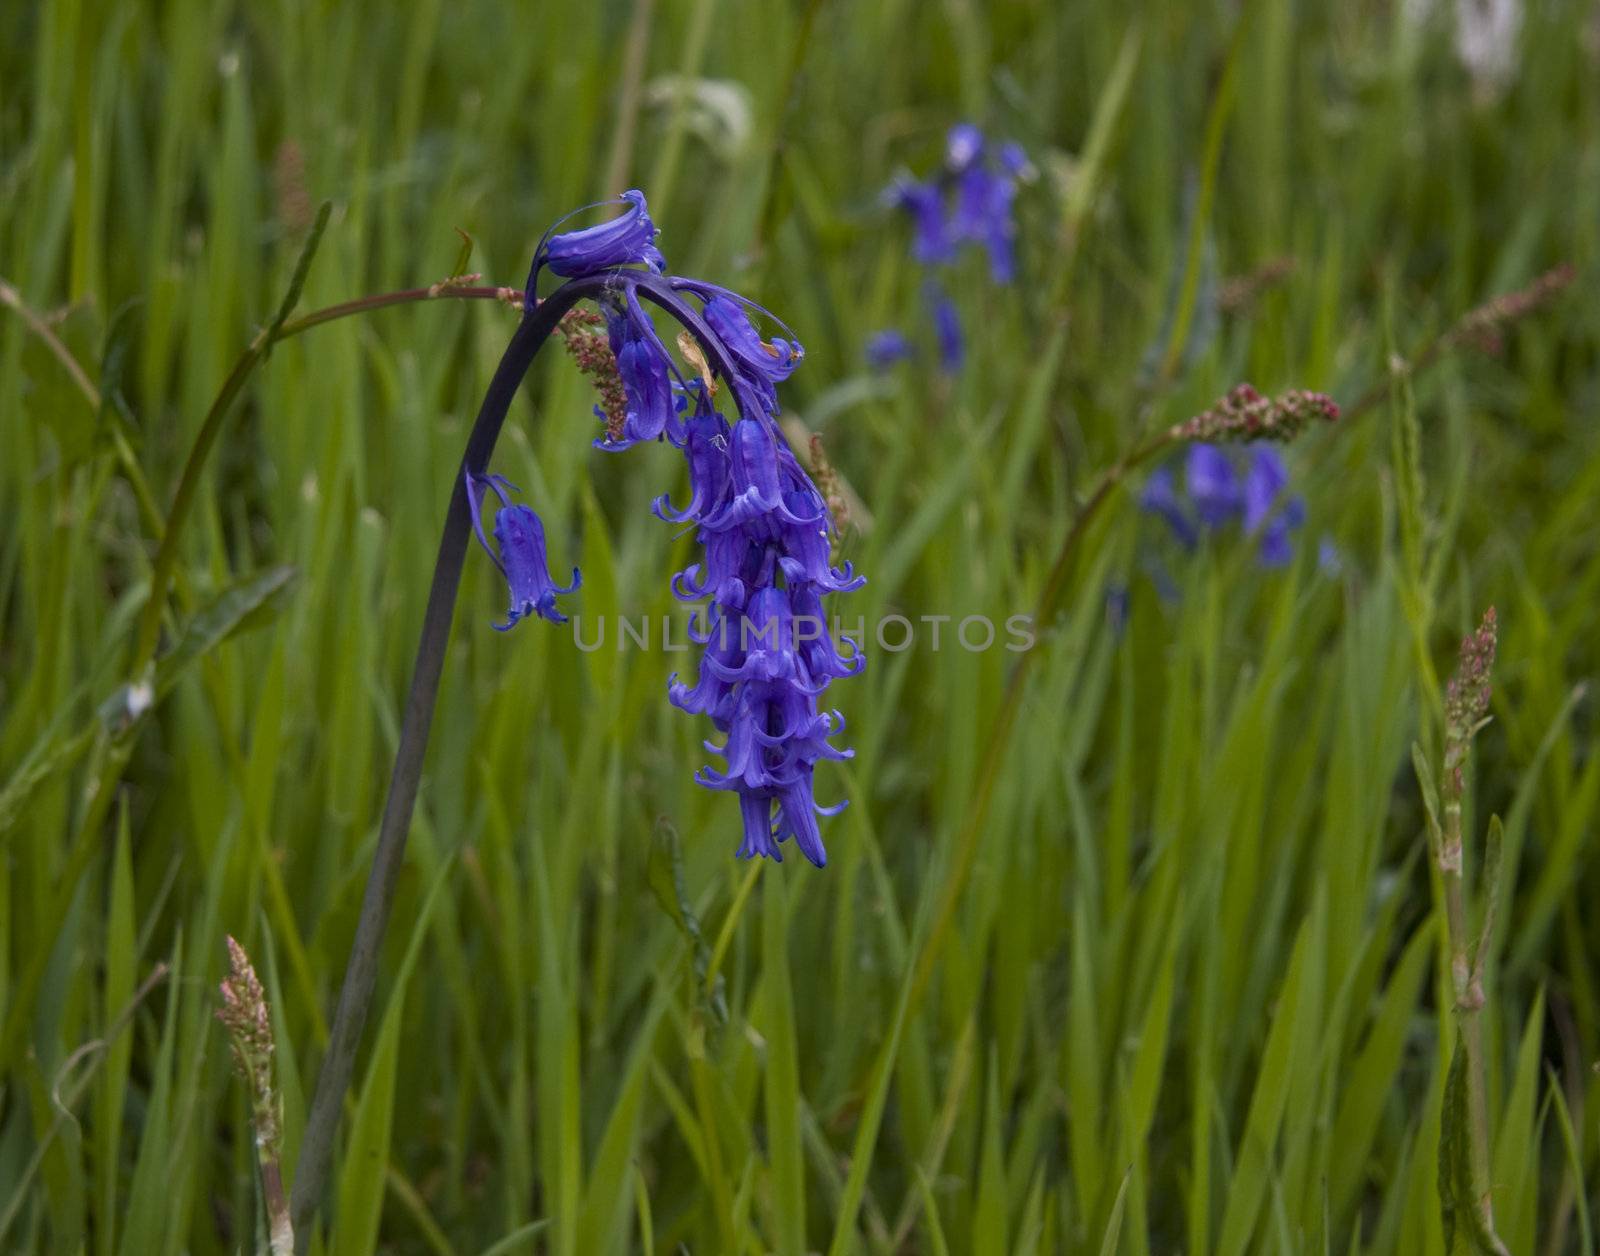 A beautiful bluebell flower weighted down by blooms.